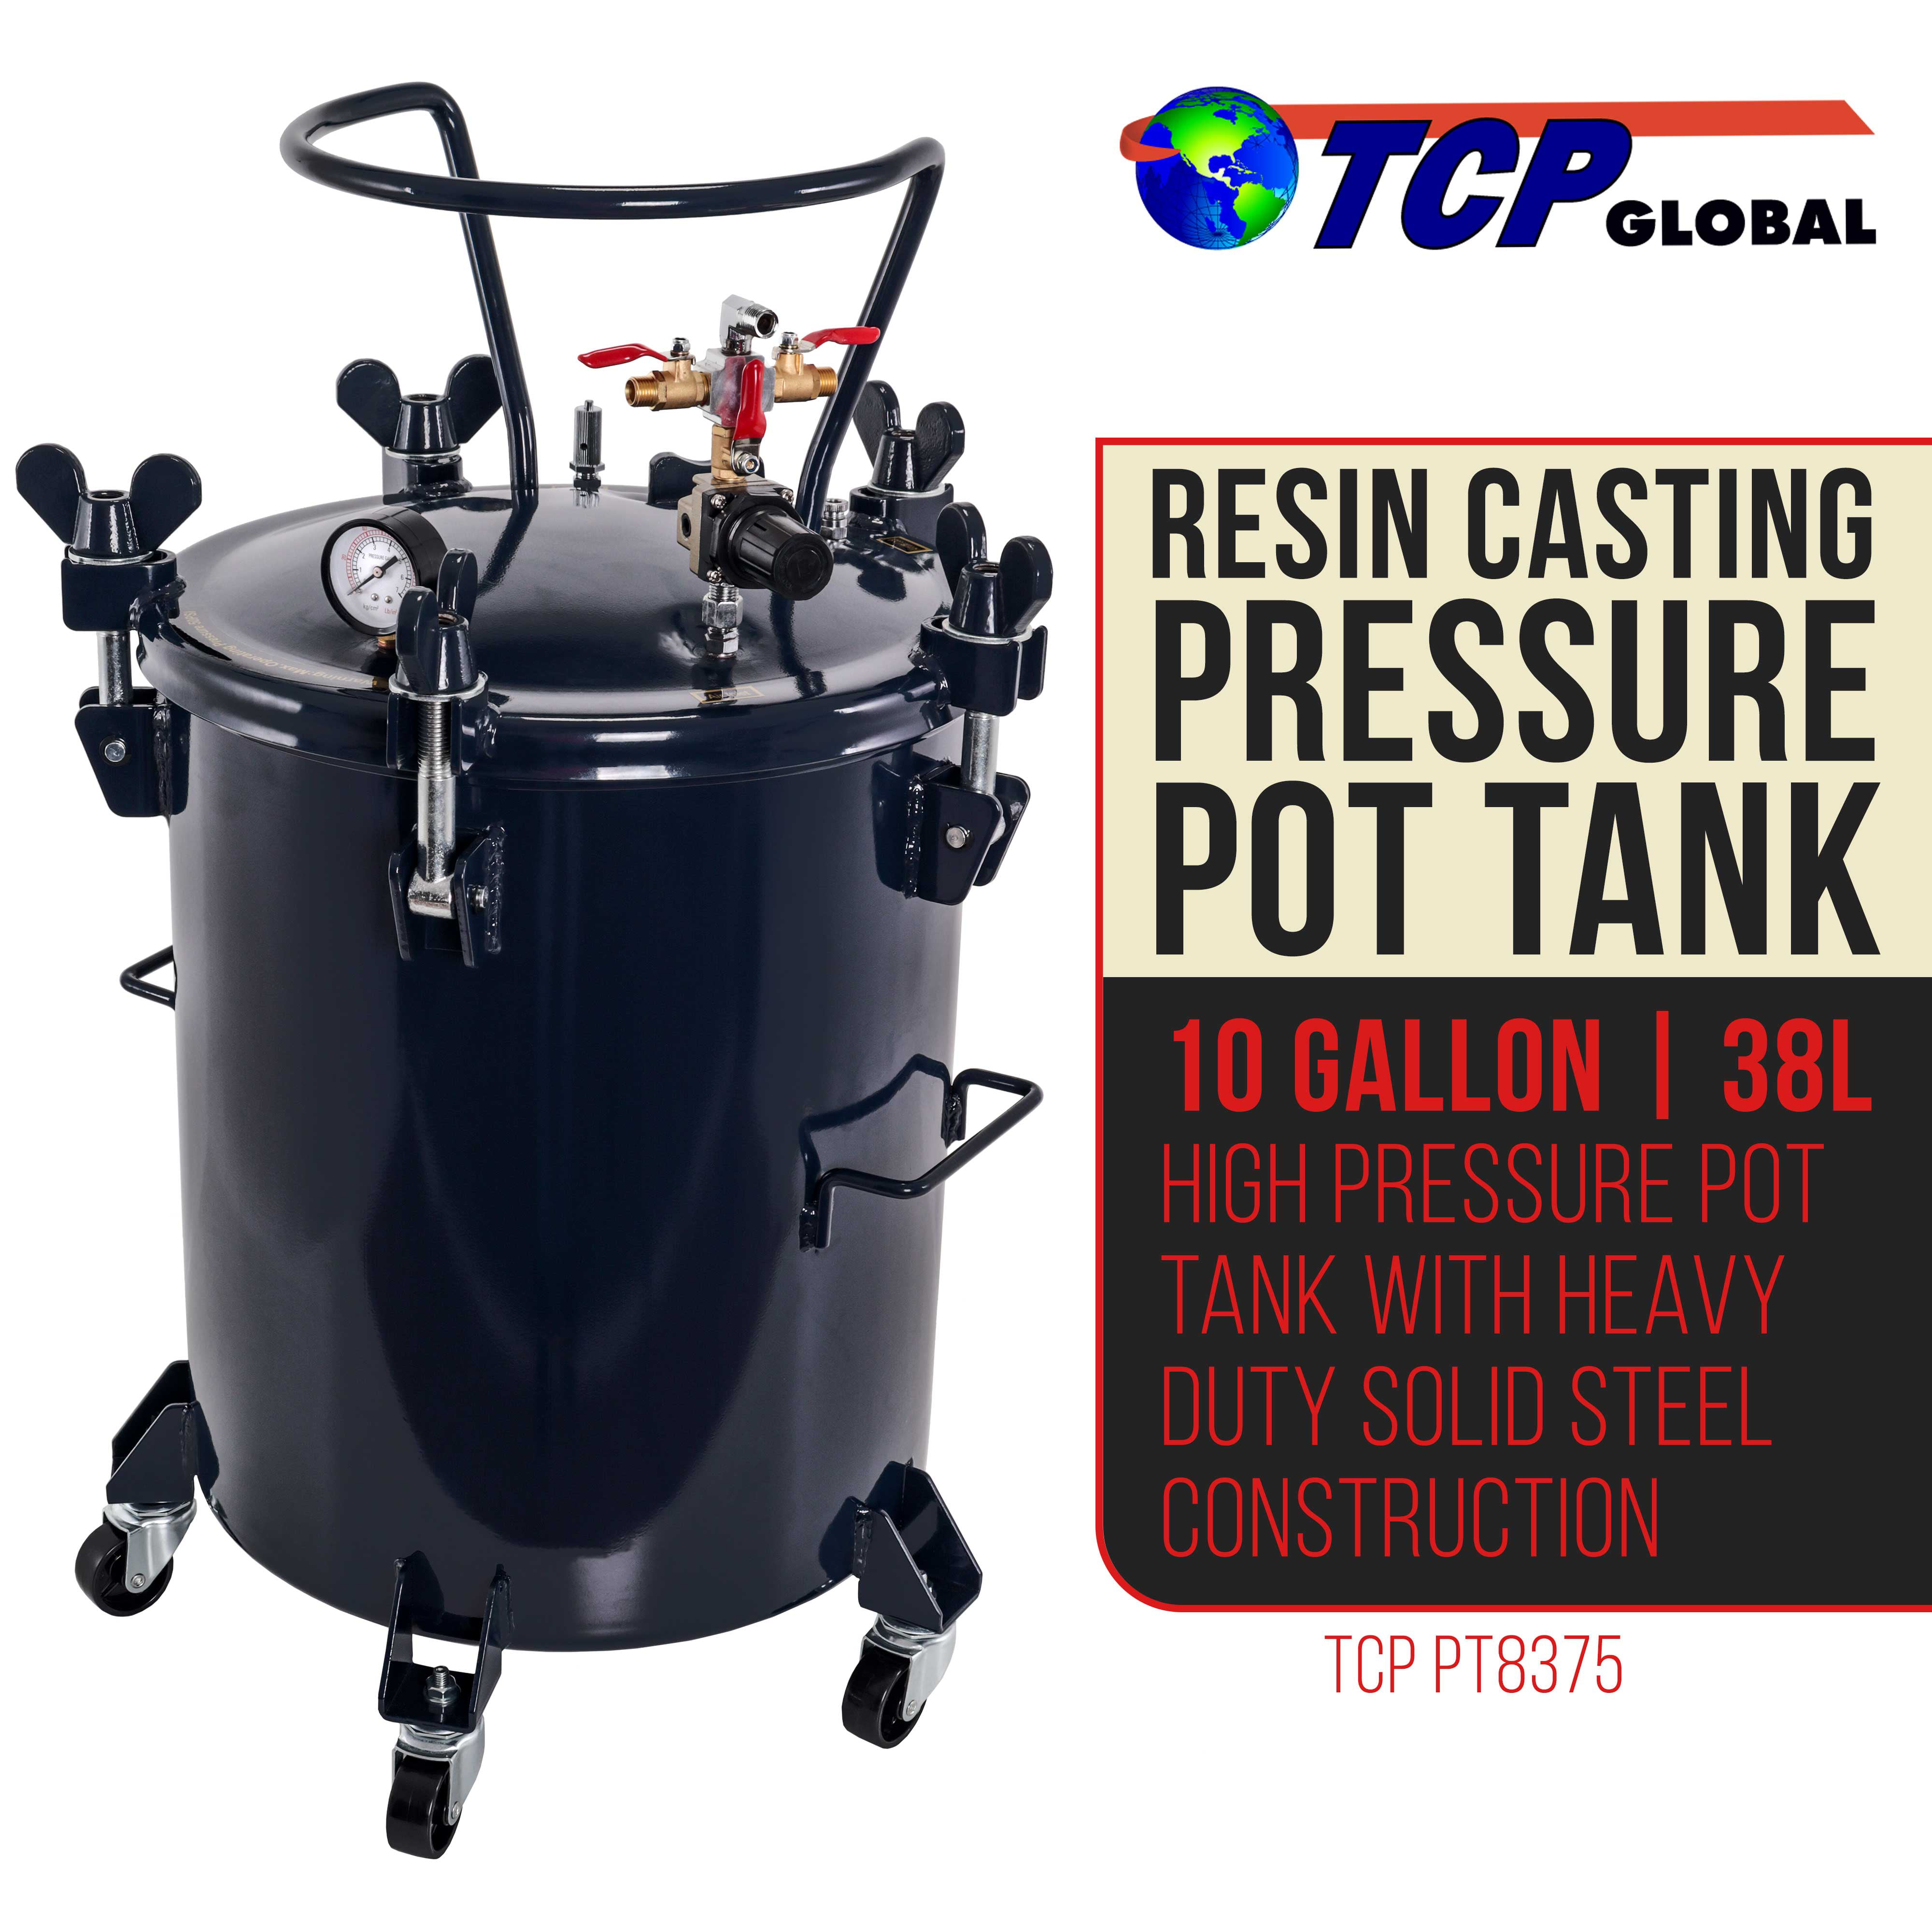 Casting resin with pressure pot!